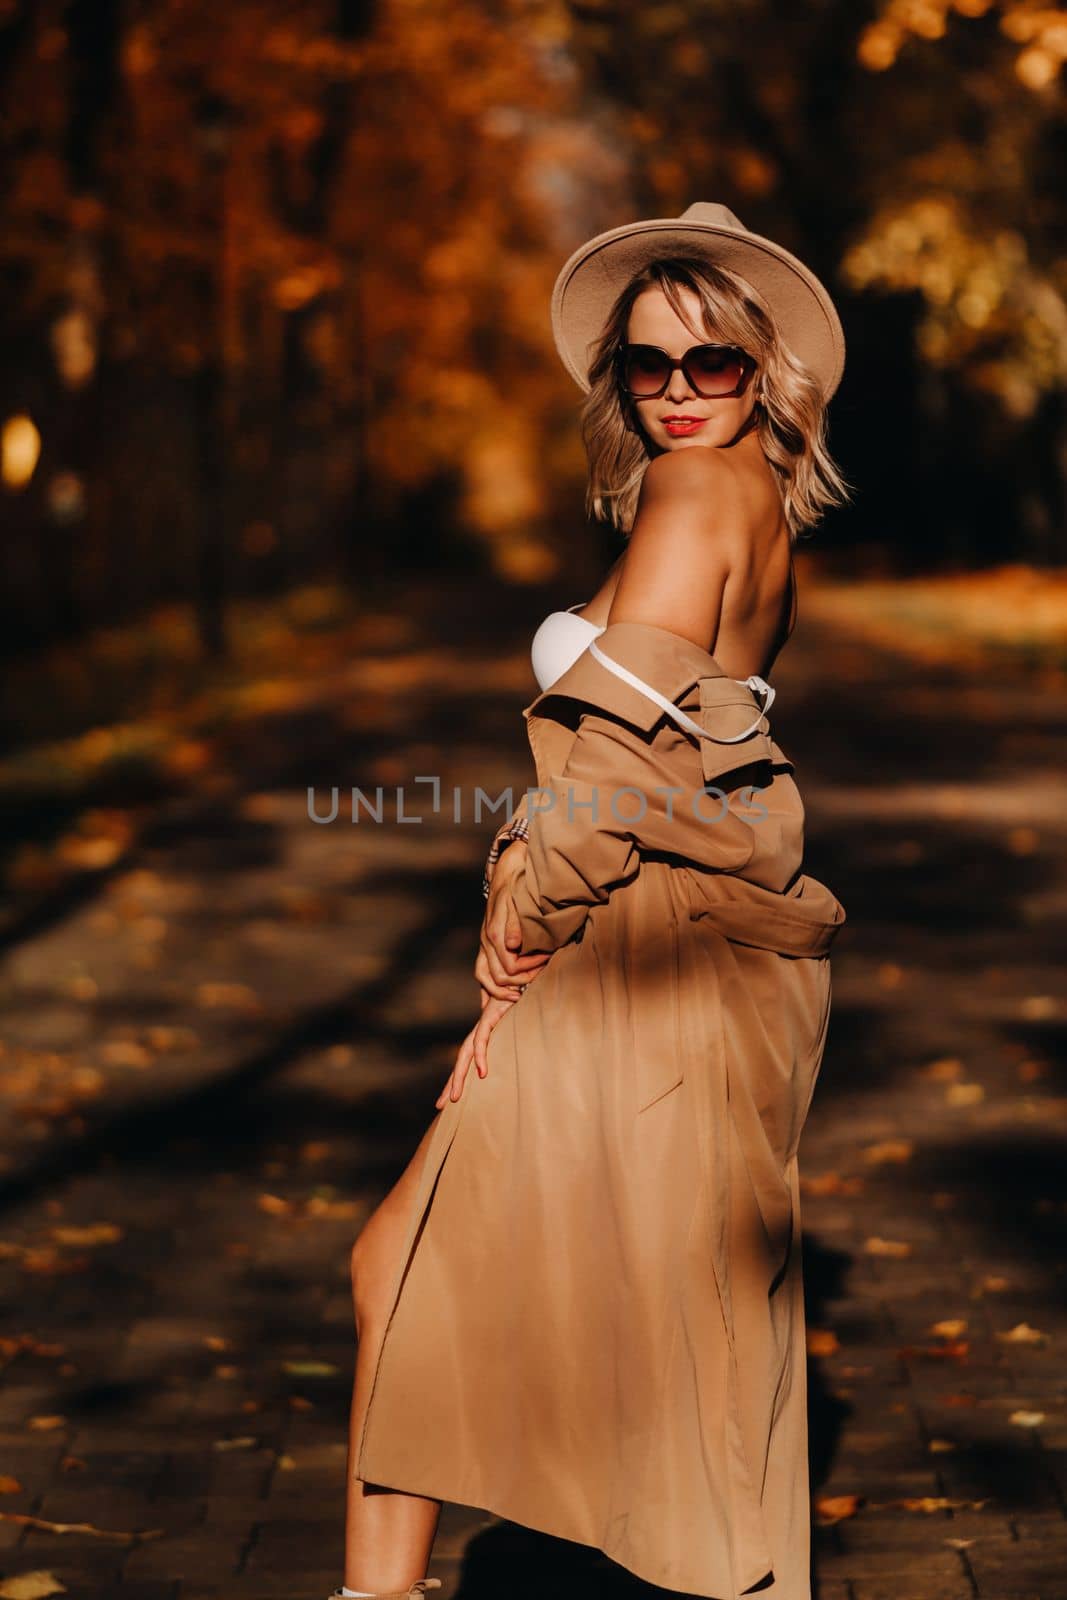 Sexy girl in a coat and hat in an autumn sunny park.